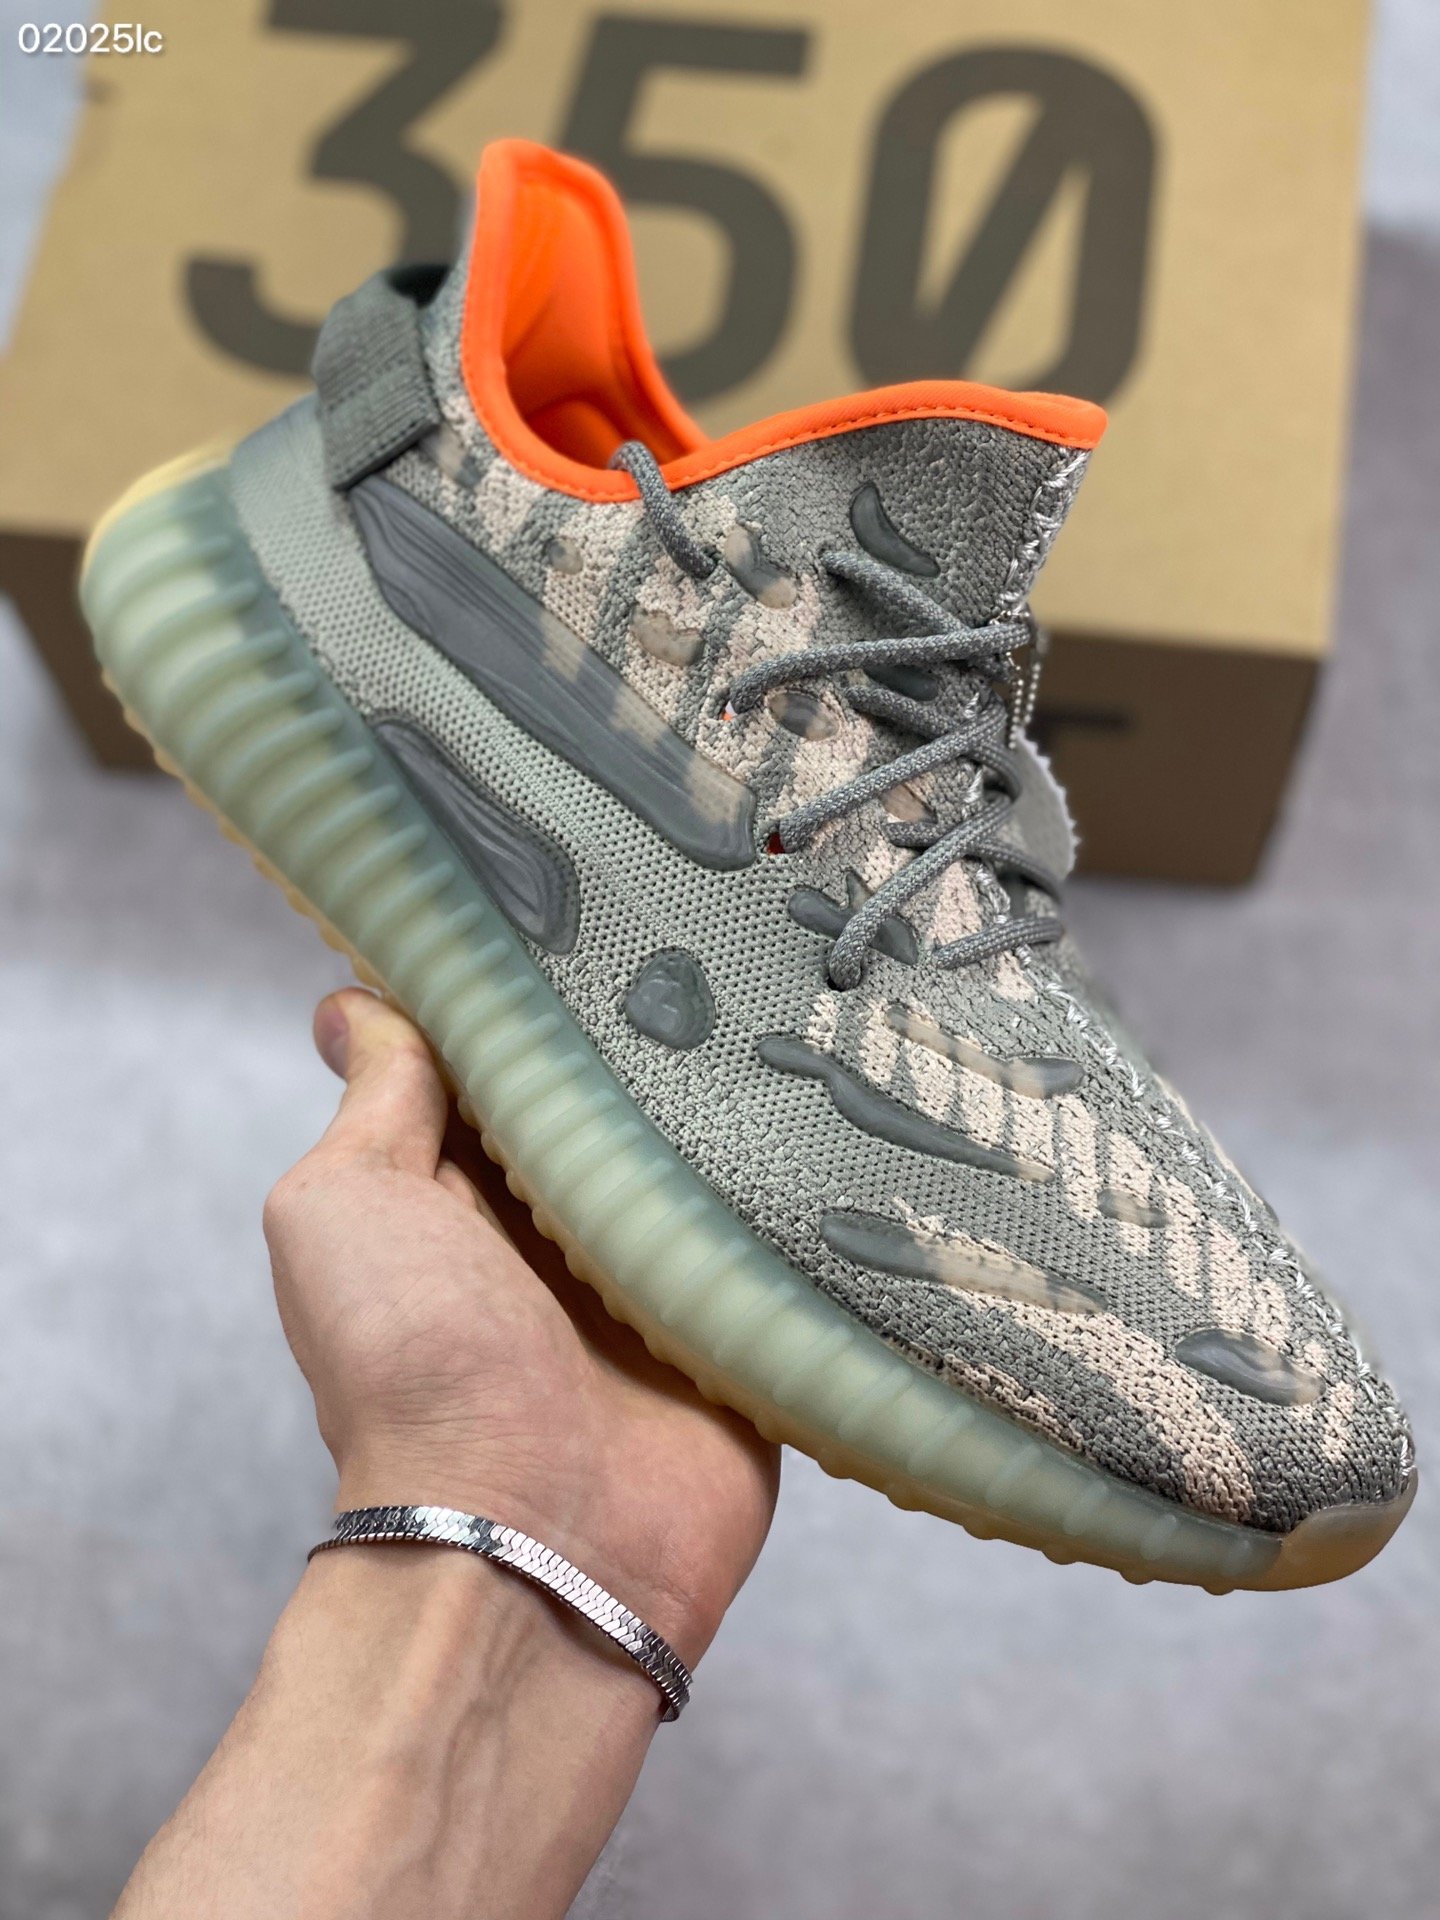 Cheap 2020 cheap Adidas yeezy Boost 350 V2 Sneakers Unisex # 225176,$99 ...